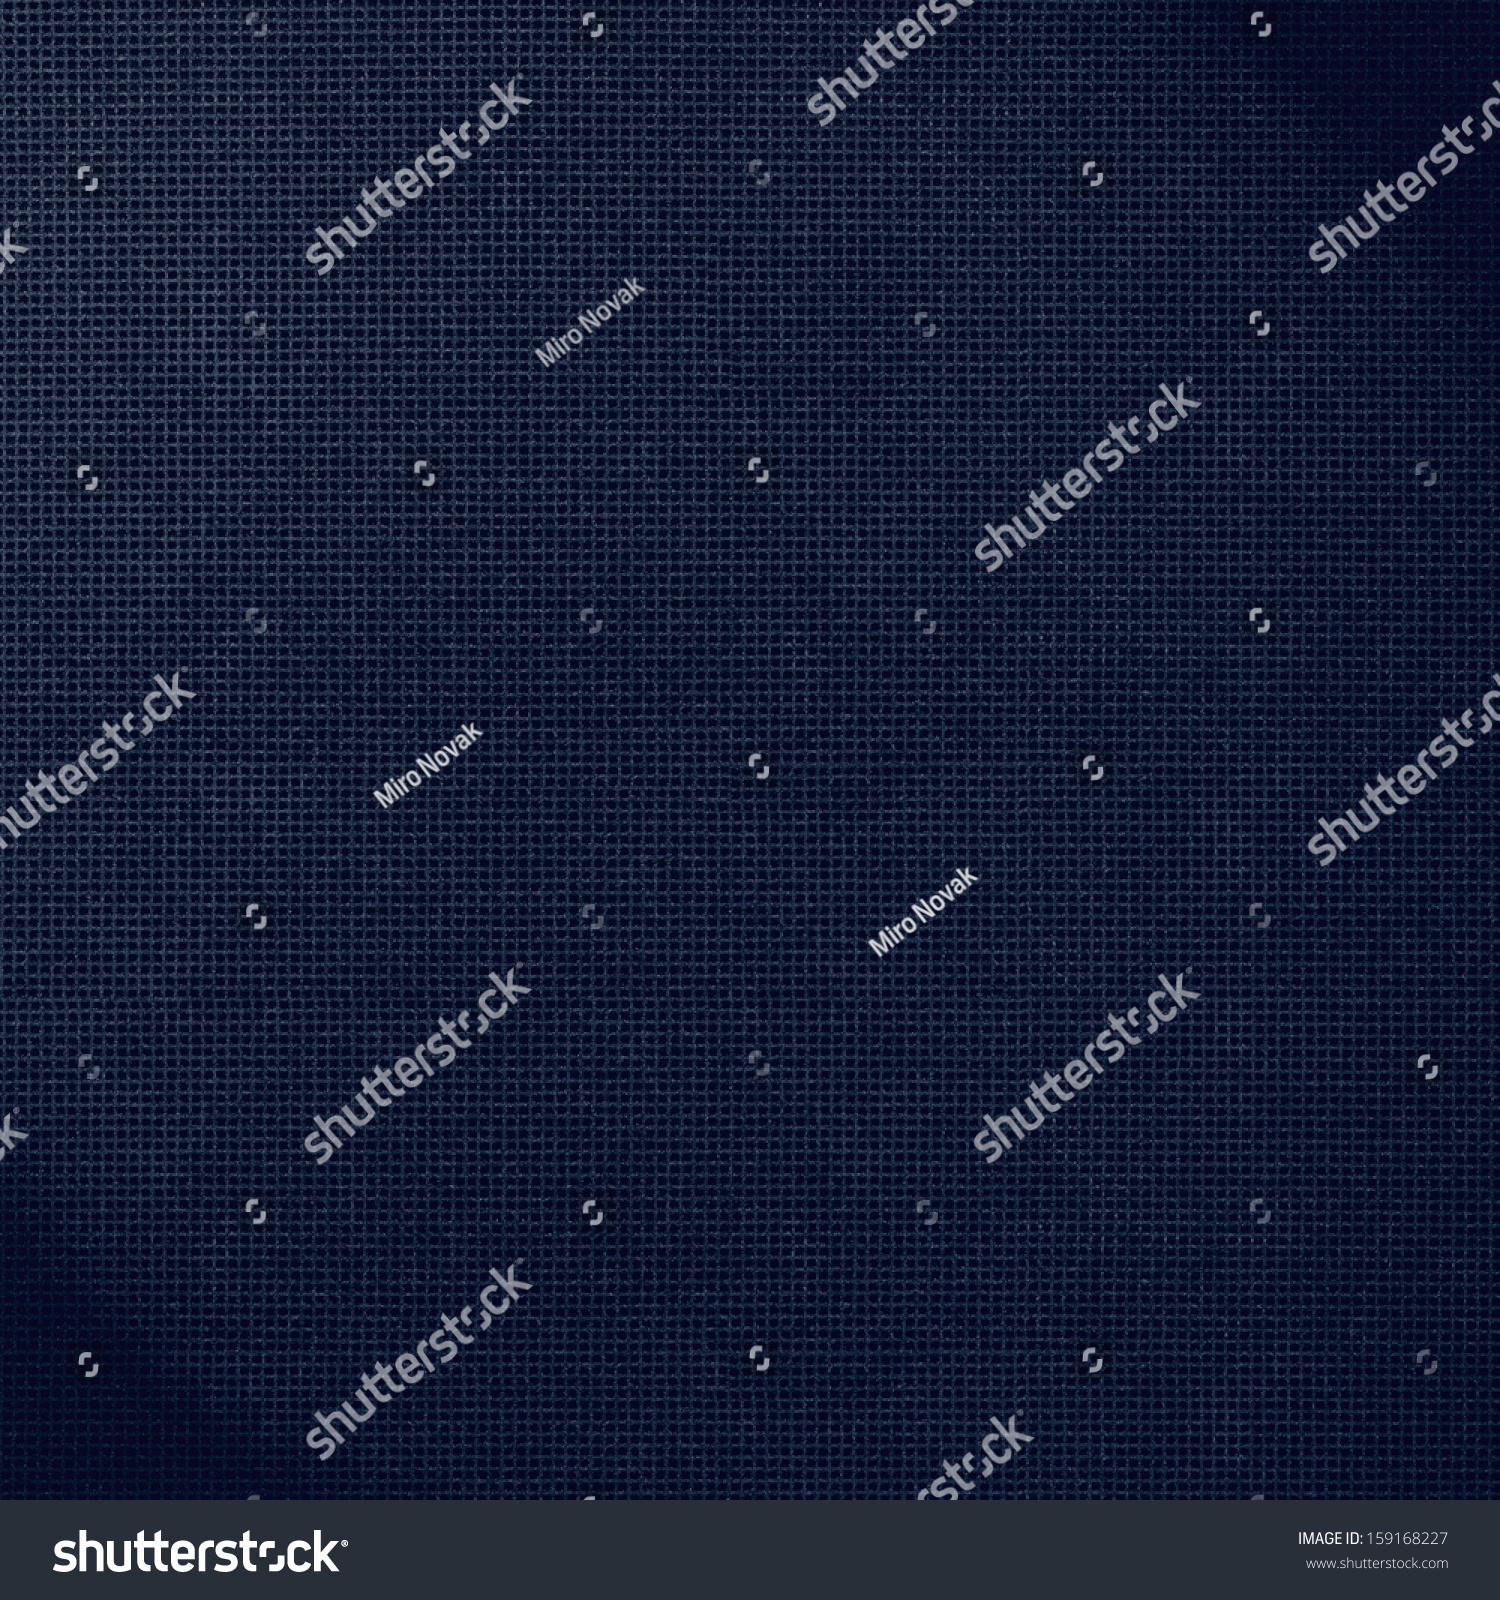 grid pattern background or navy blue texture #159168227